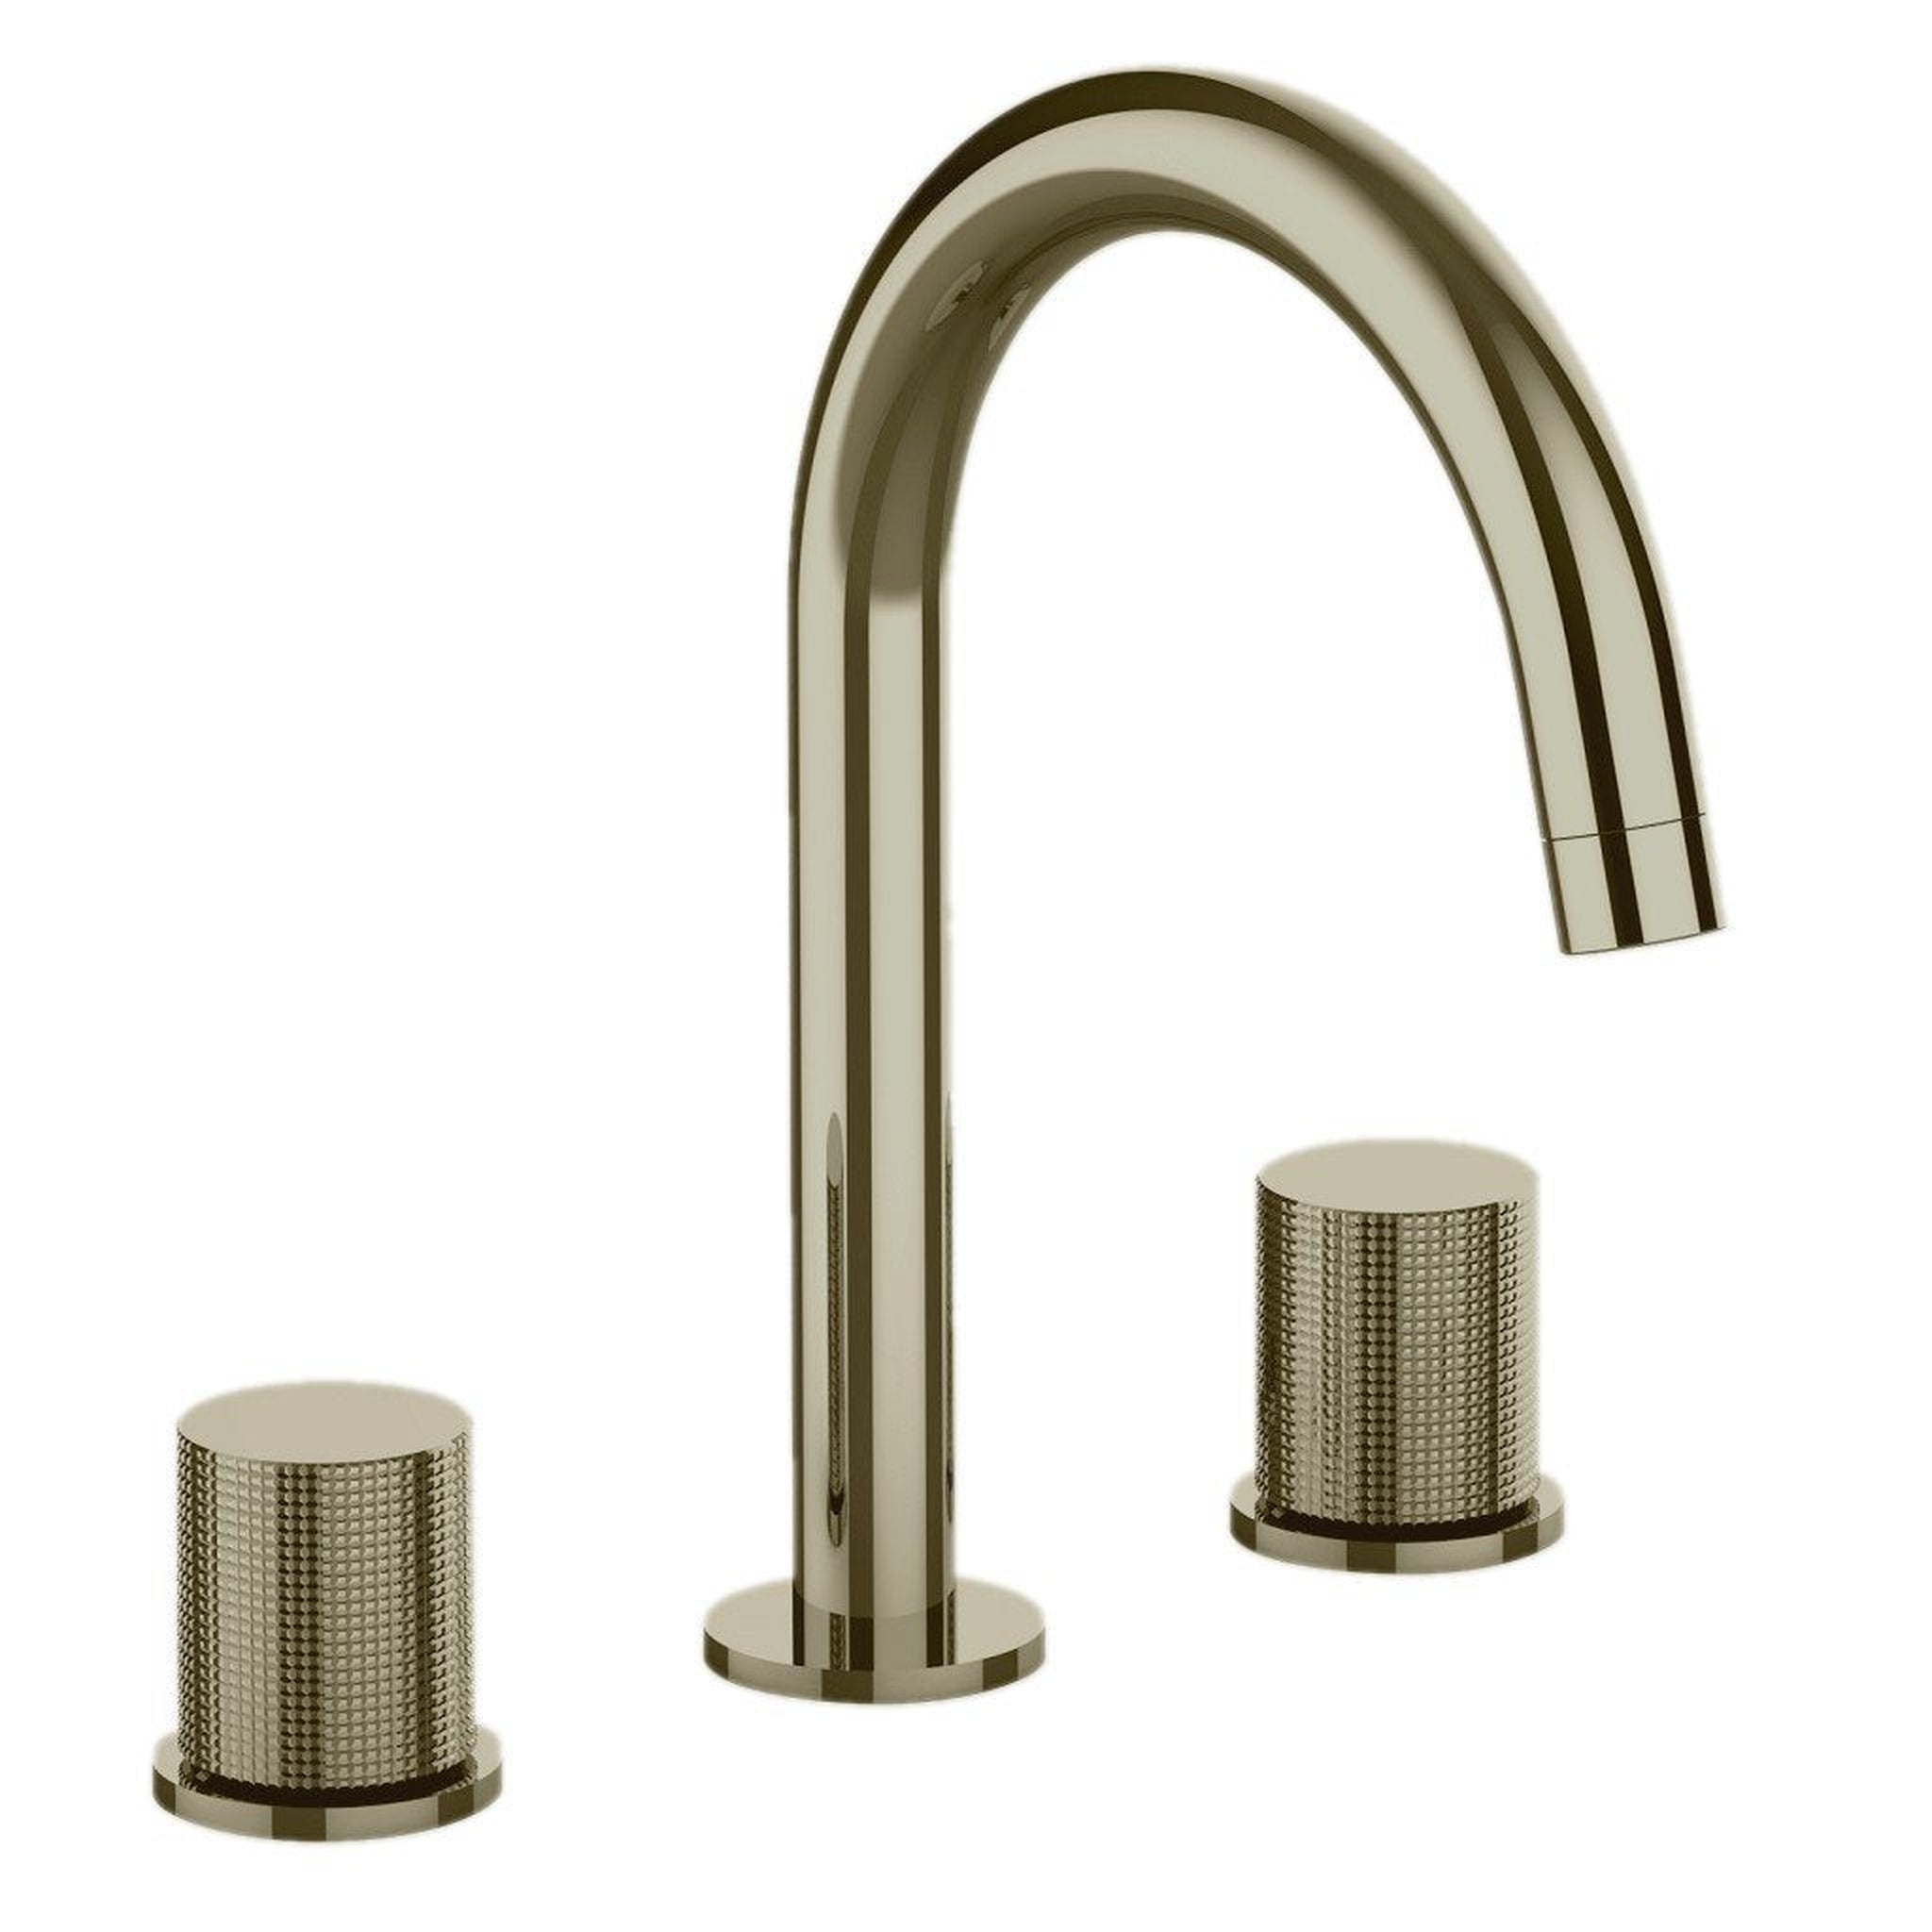 LaToscana by Paini, LaToscana Alessandra Brushed Nickel Widespread Lavatory Faucet With Grip Handles